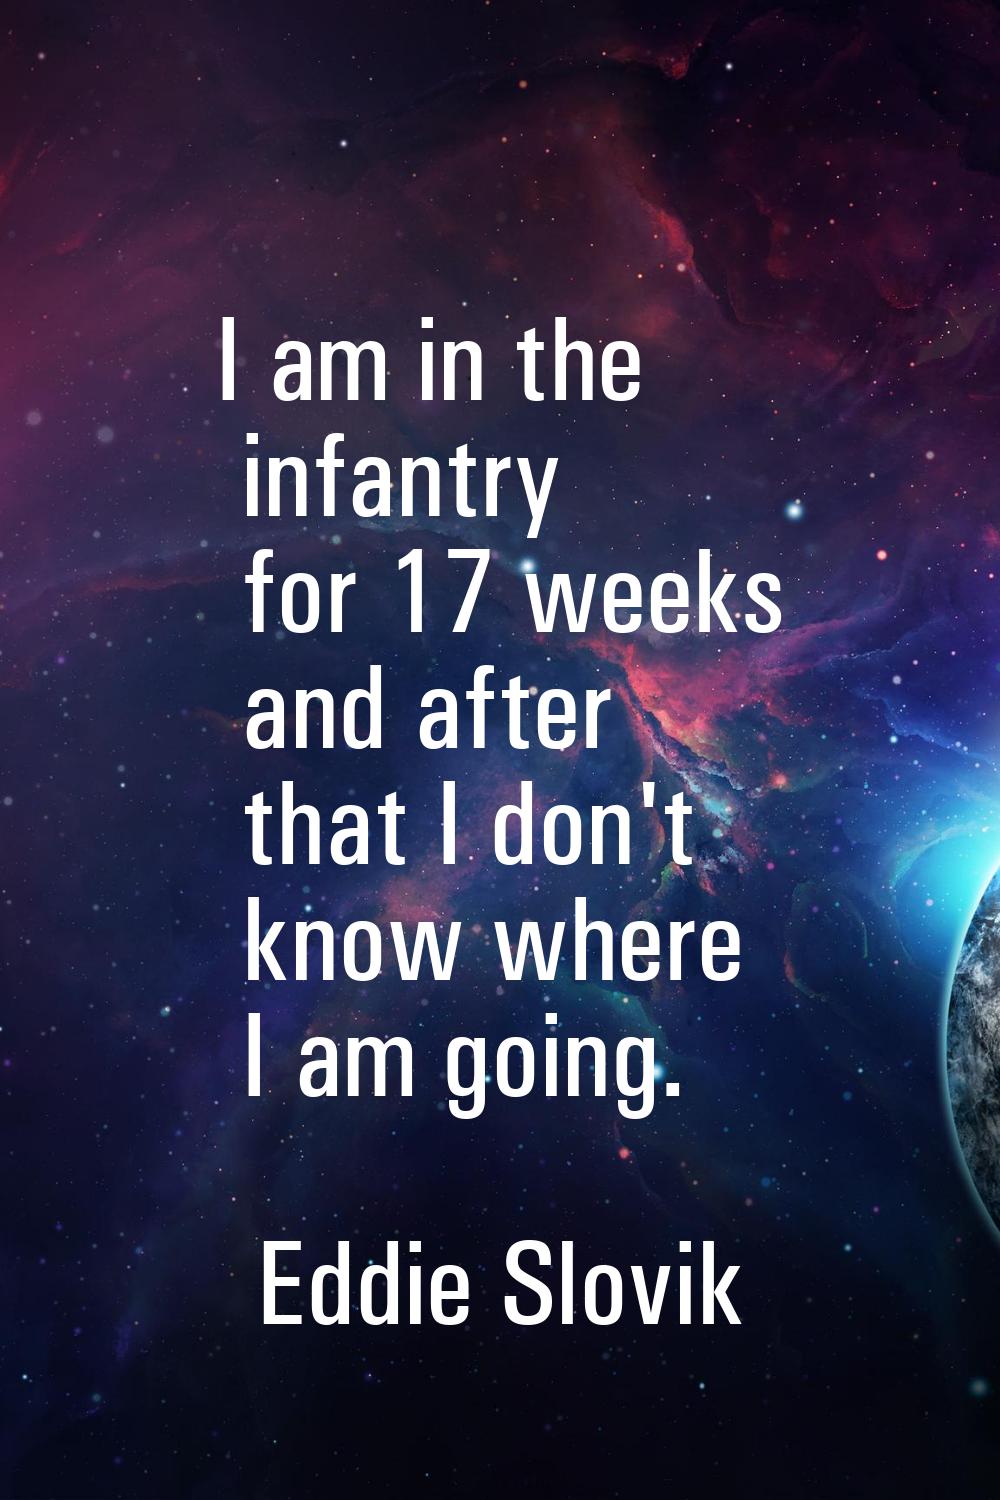 I am in the infantry for 17 weeks and after that I don't know where I am going.